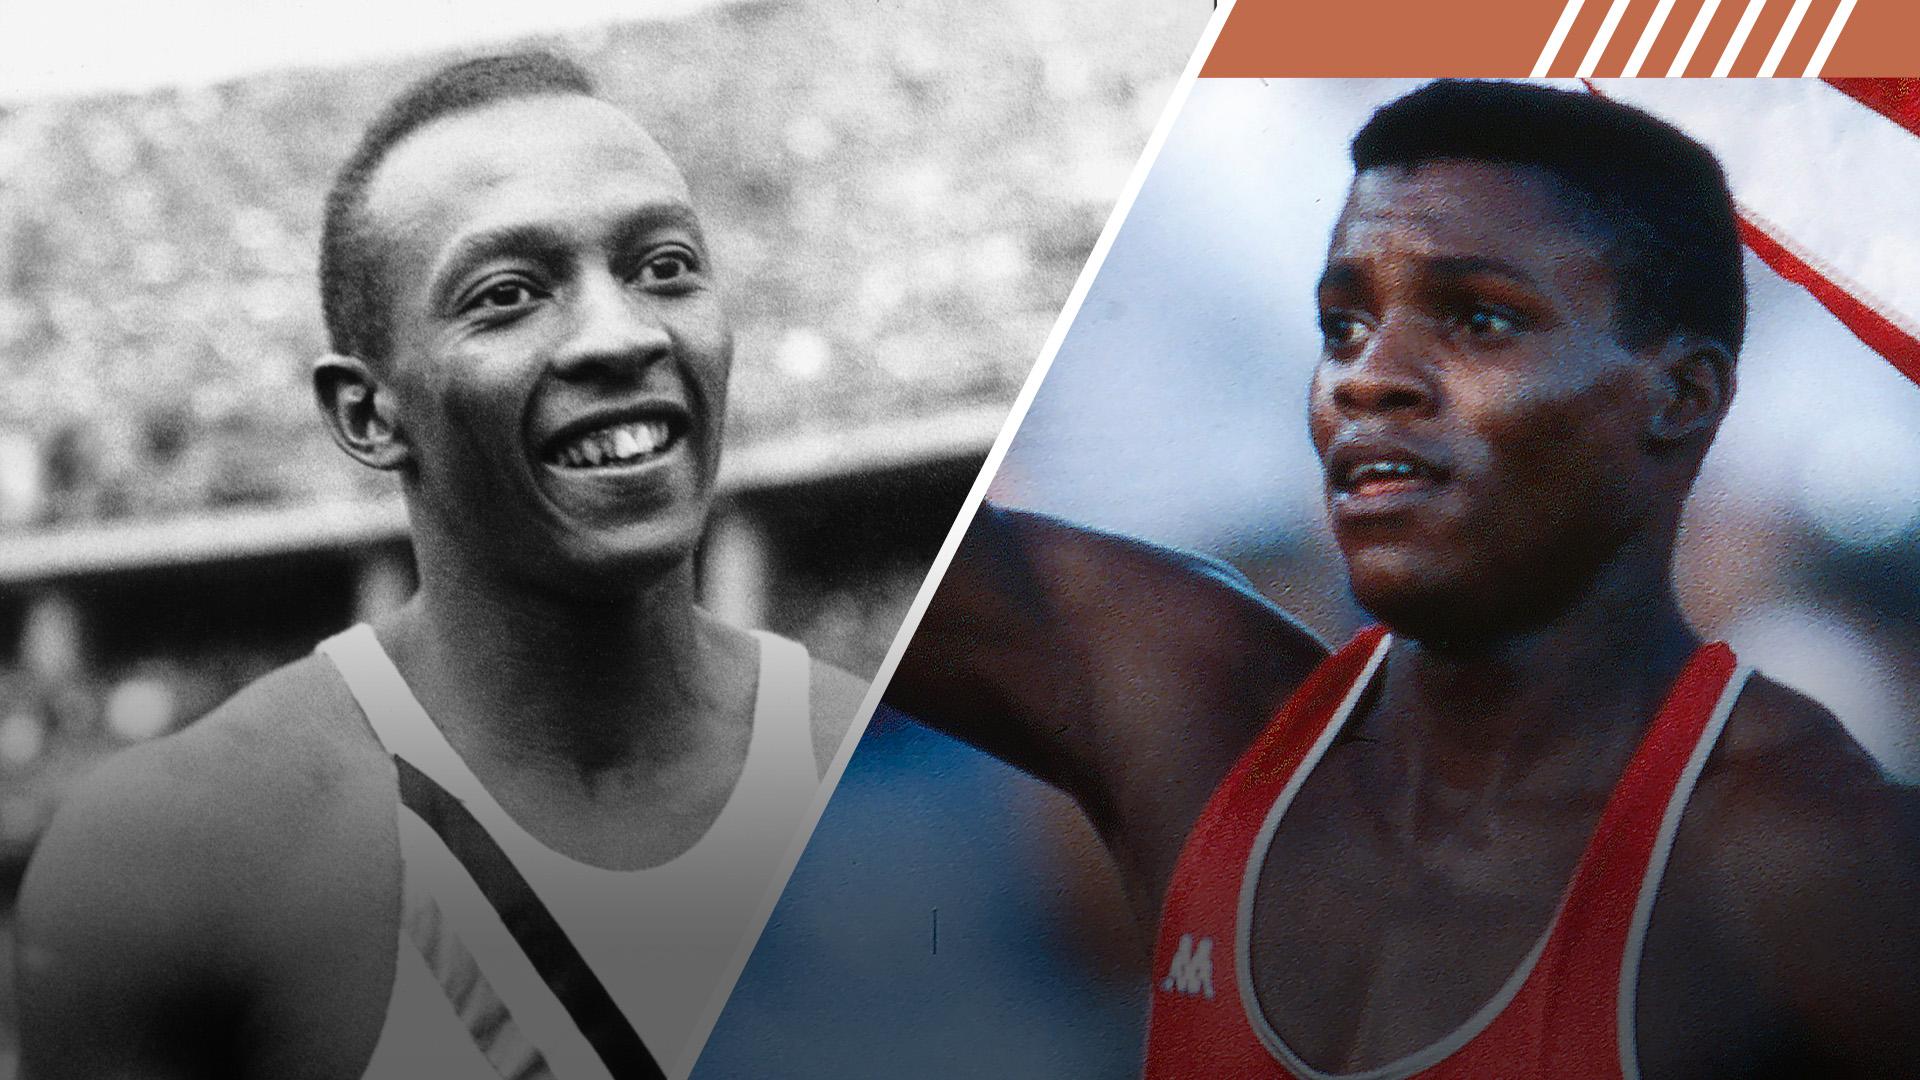 What's the greatest U.S. performance in Olympic history?